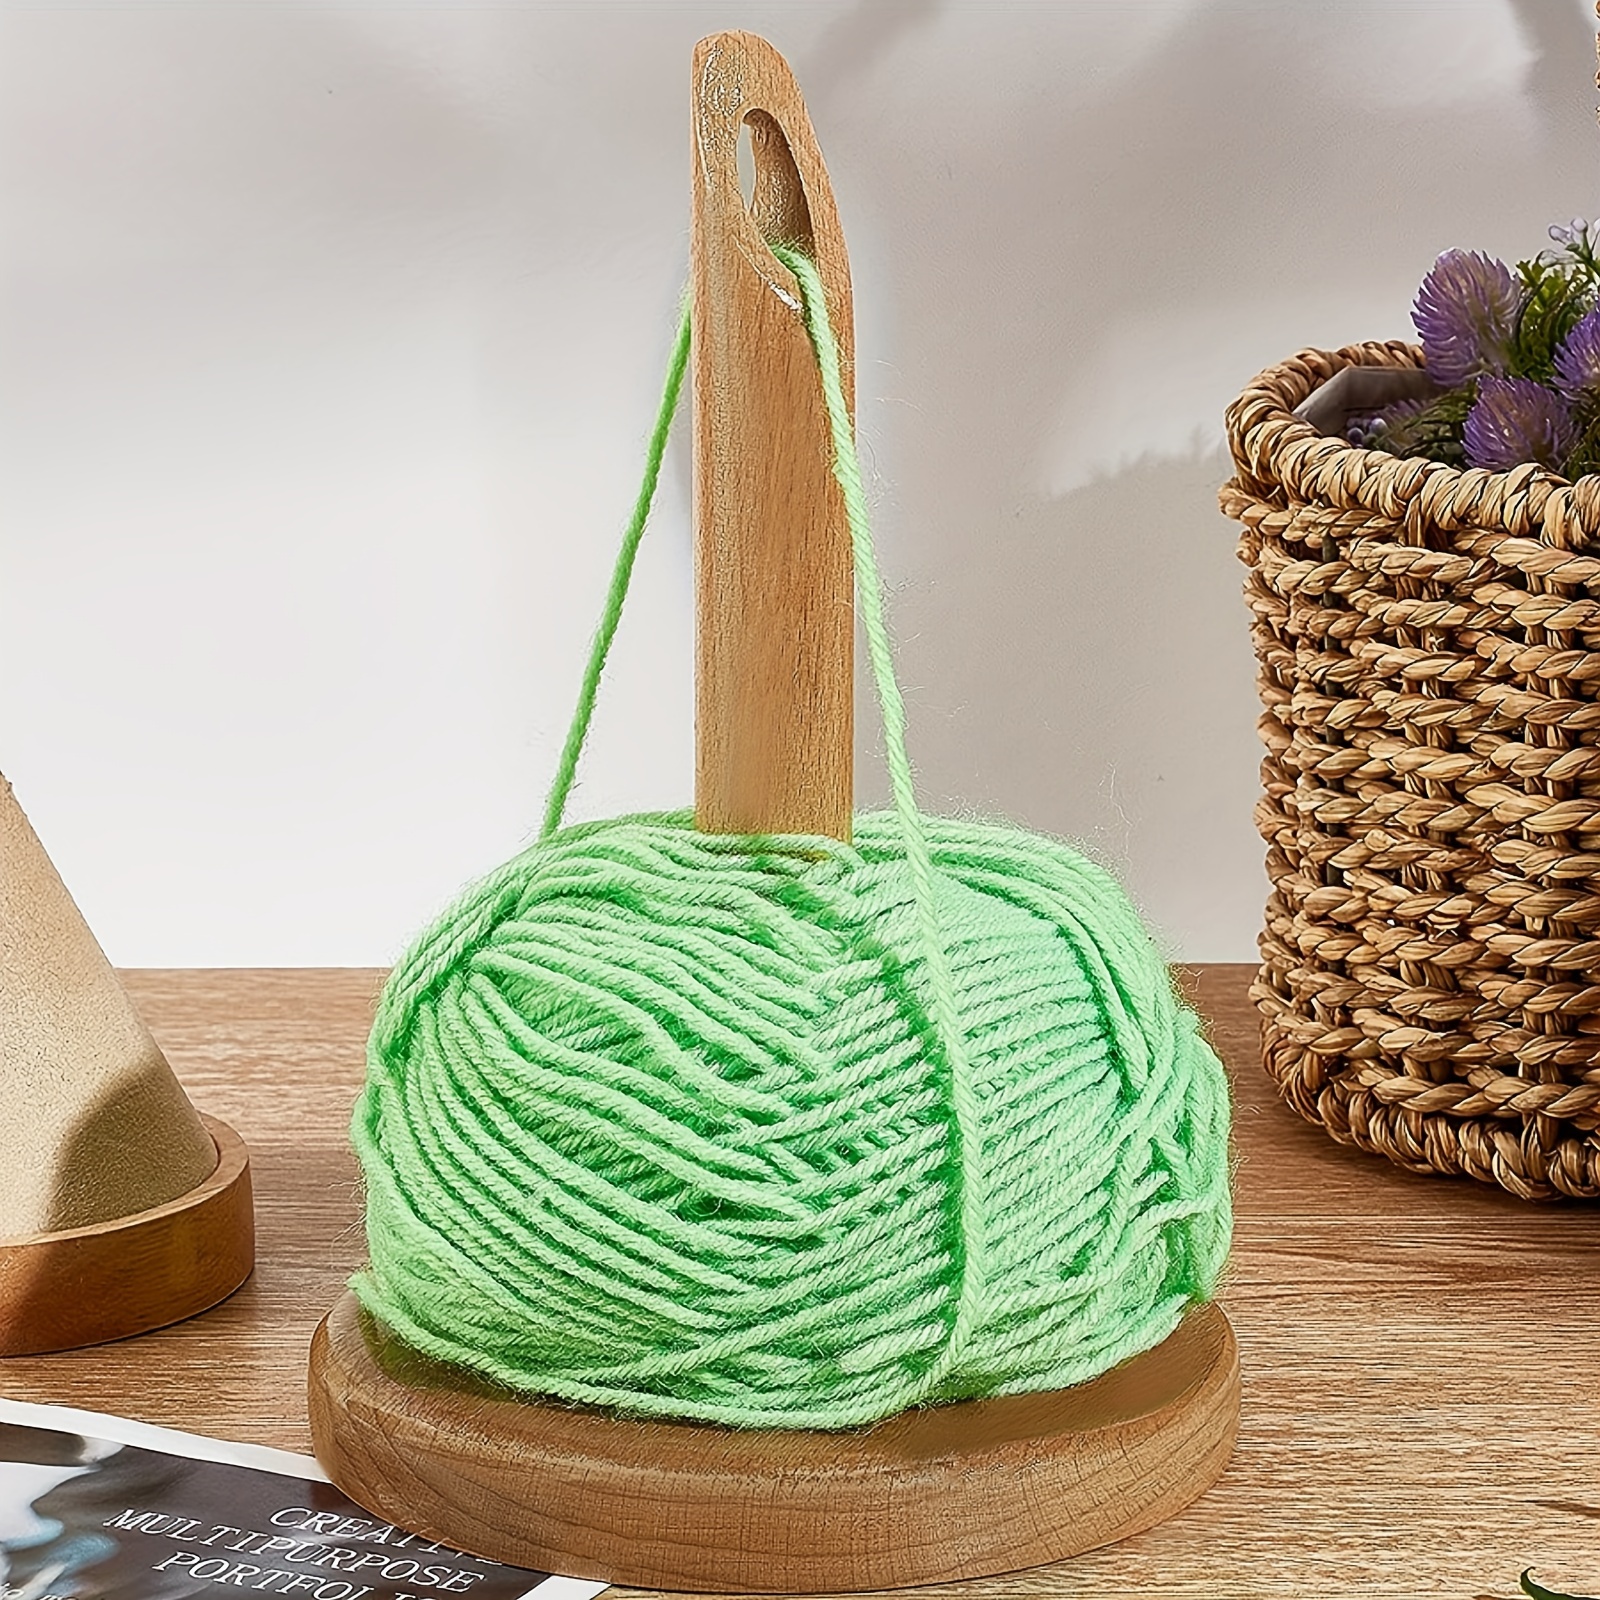 Portable Wooden Yarn Holder Portable Wrist Yarn Holder,String  Dispenser,Yarn Minder,Prevents Yarn Tangling and Misalignment,Gift for The  Craft Lovers